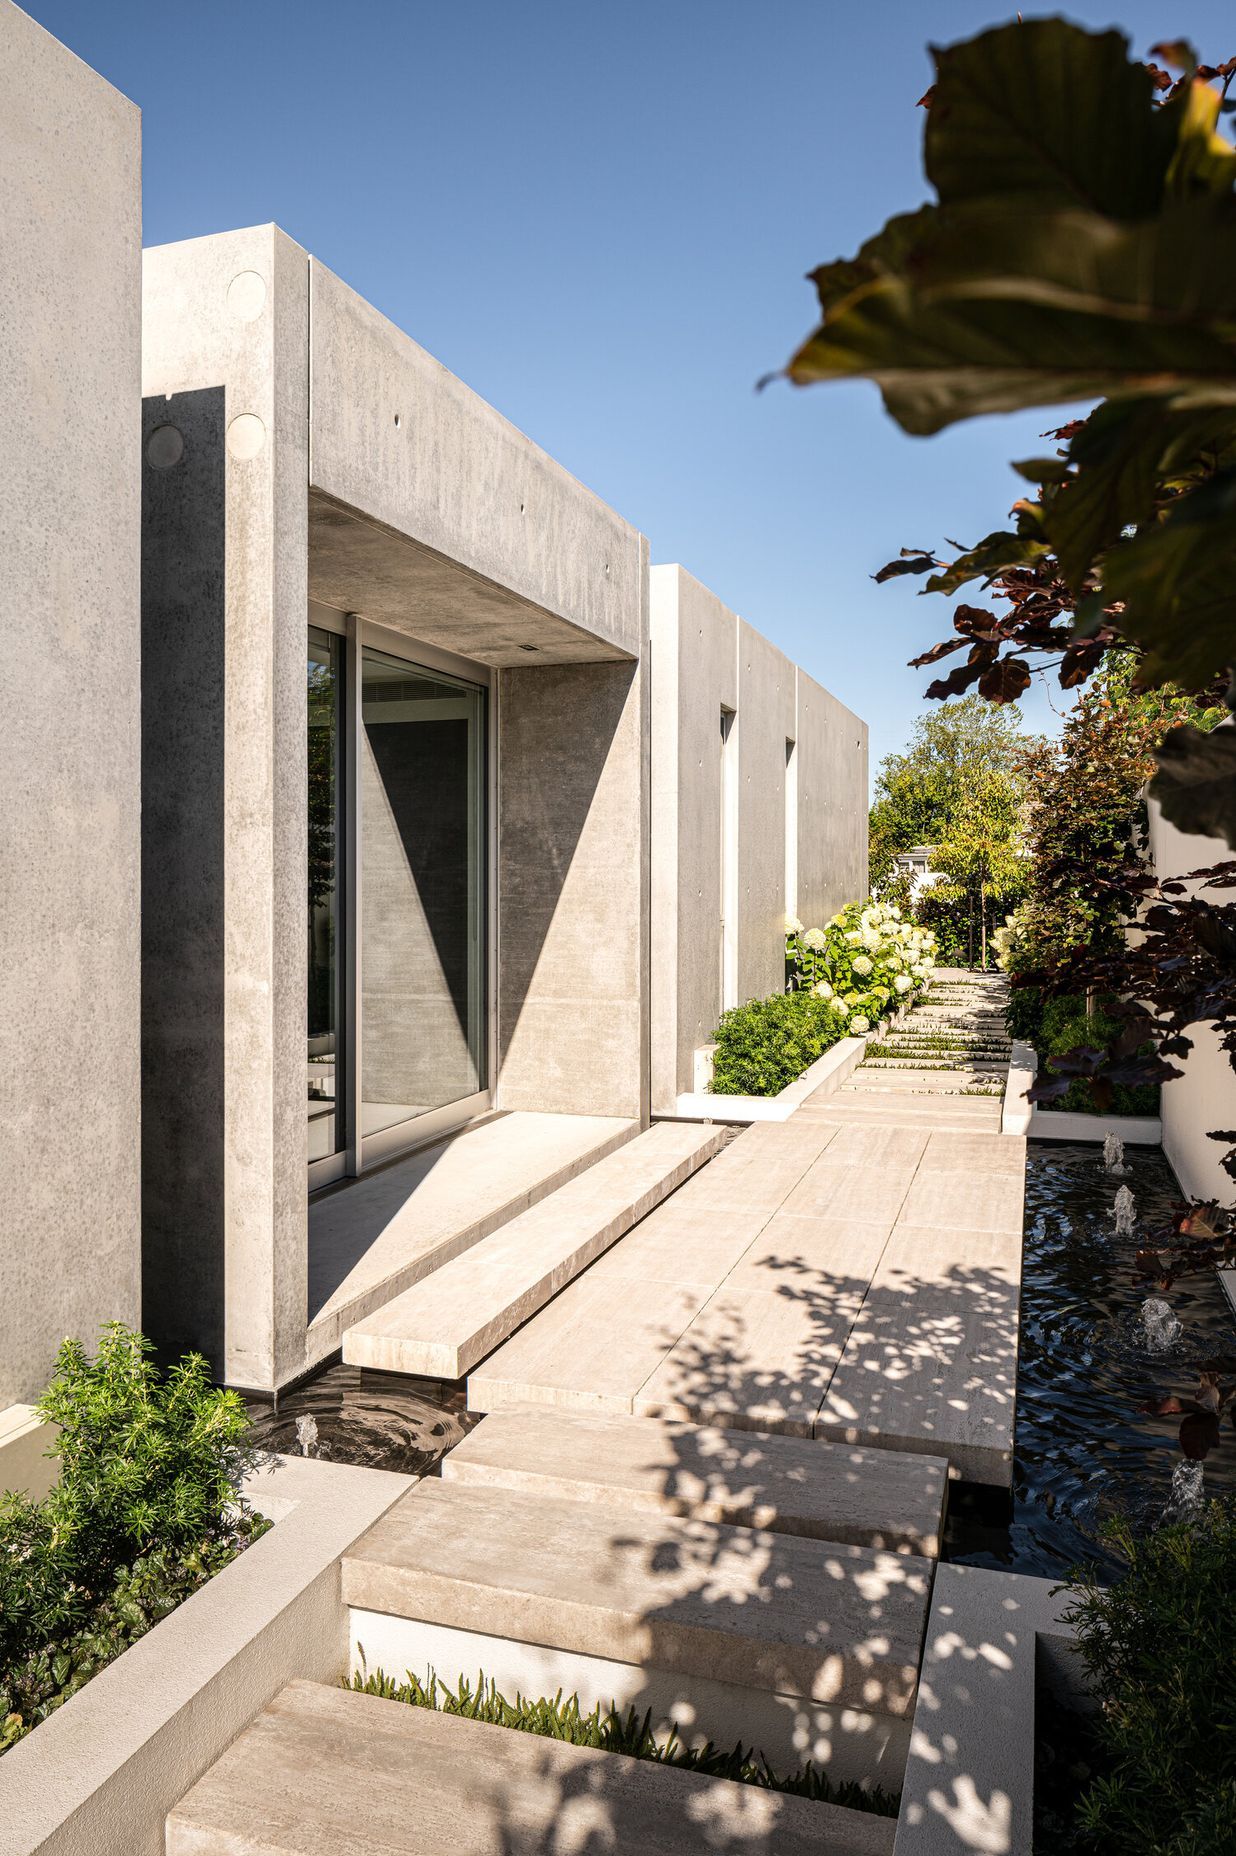 Natural elements—water and plants—soften the almost brutalist concrete forms creating a visual and aural counterpoint to the structure.